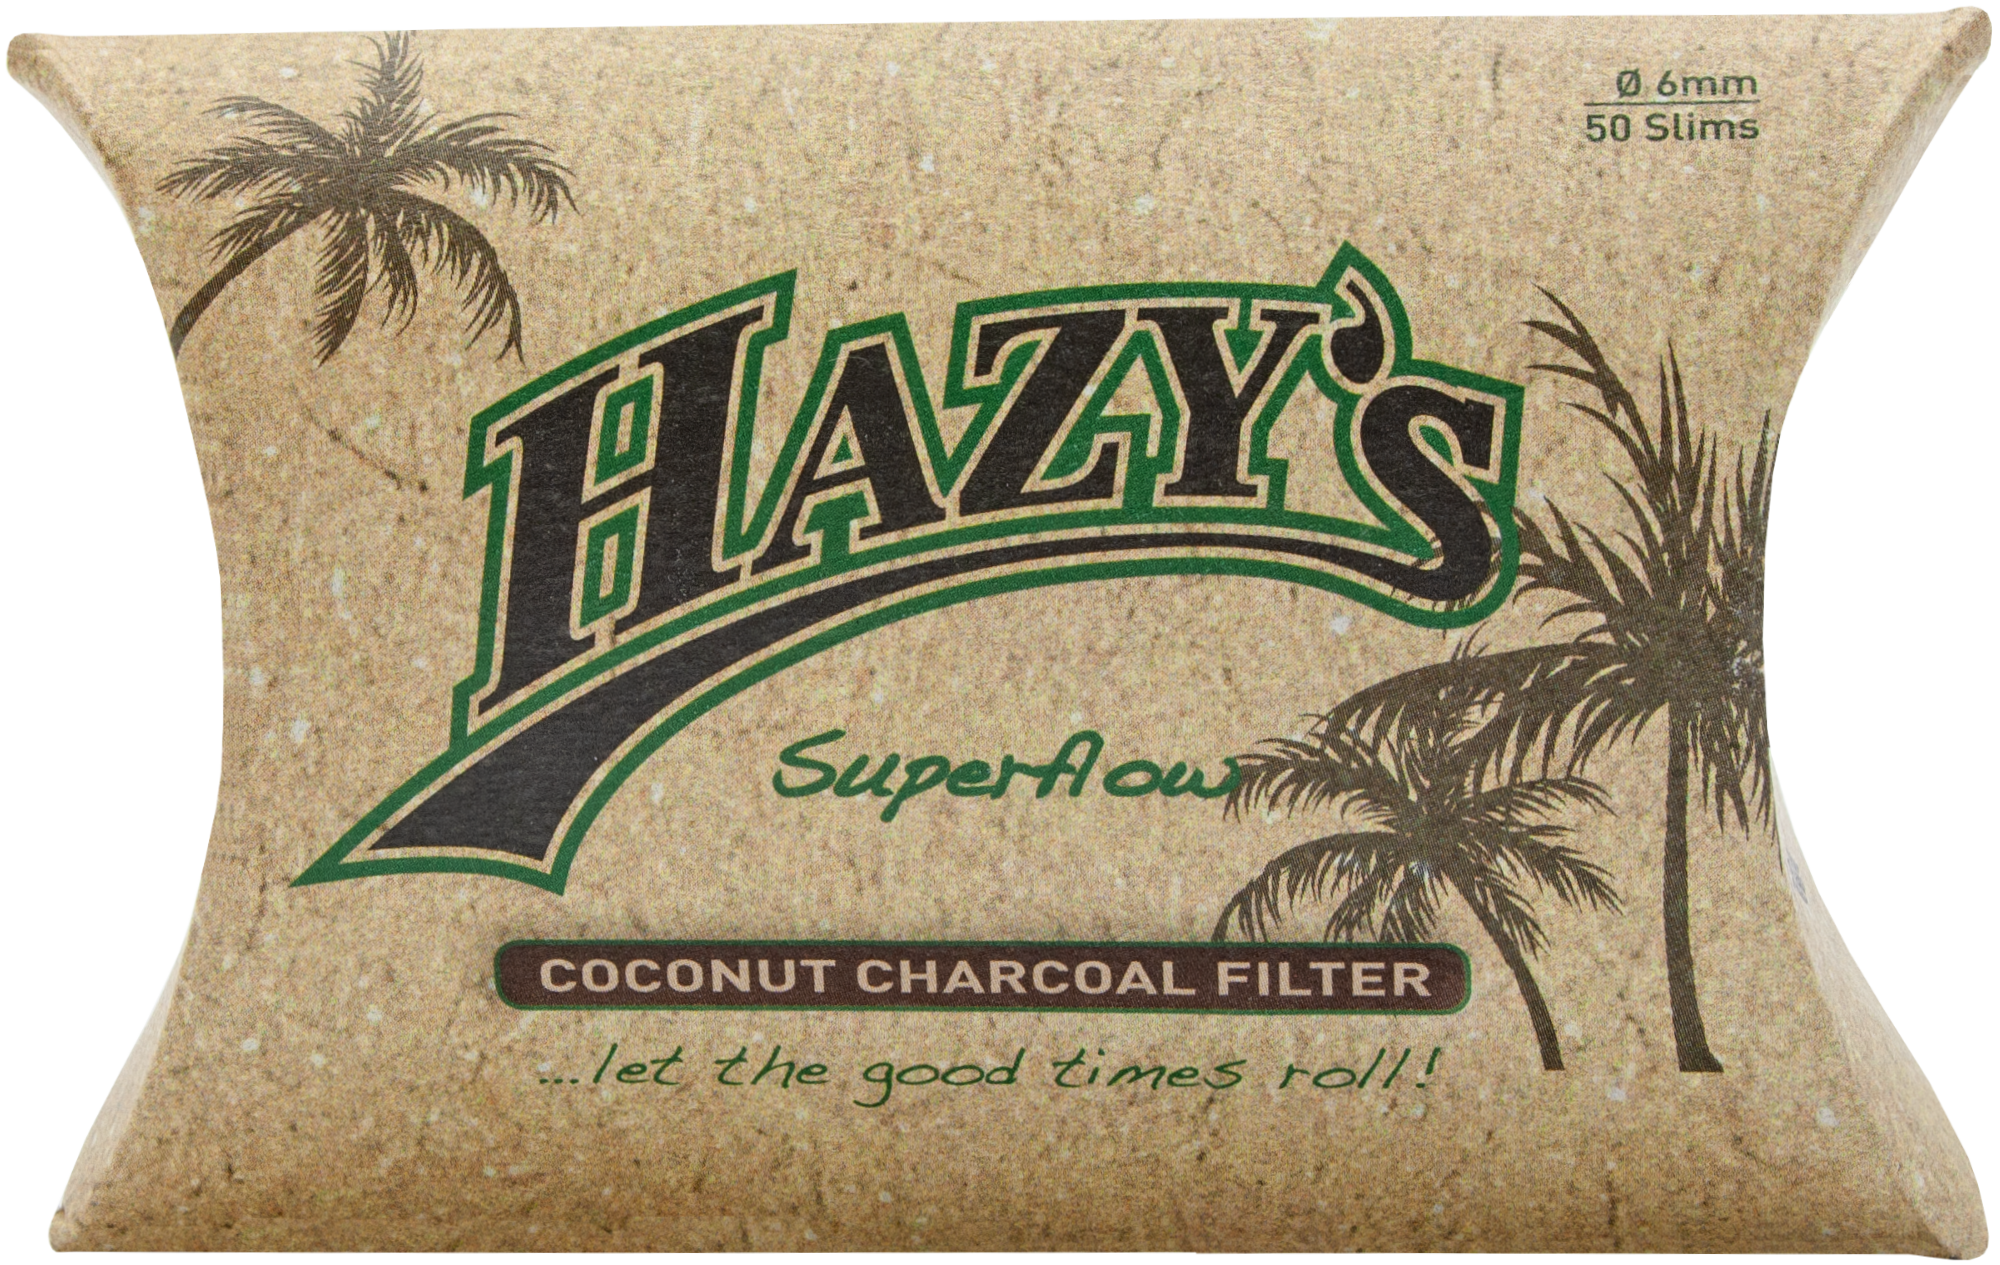 Hazy's 50 Roll Your Own Coconut Charcoal Filter 6mm (10x)